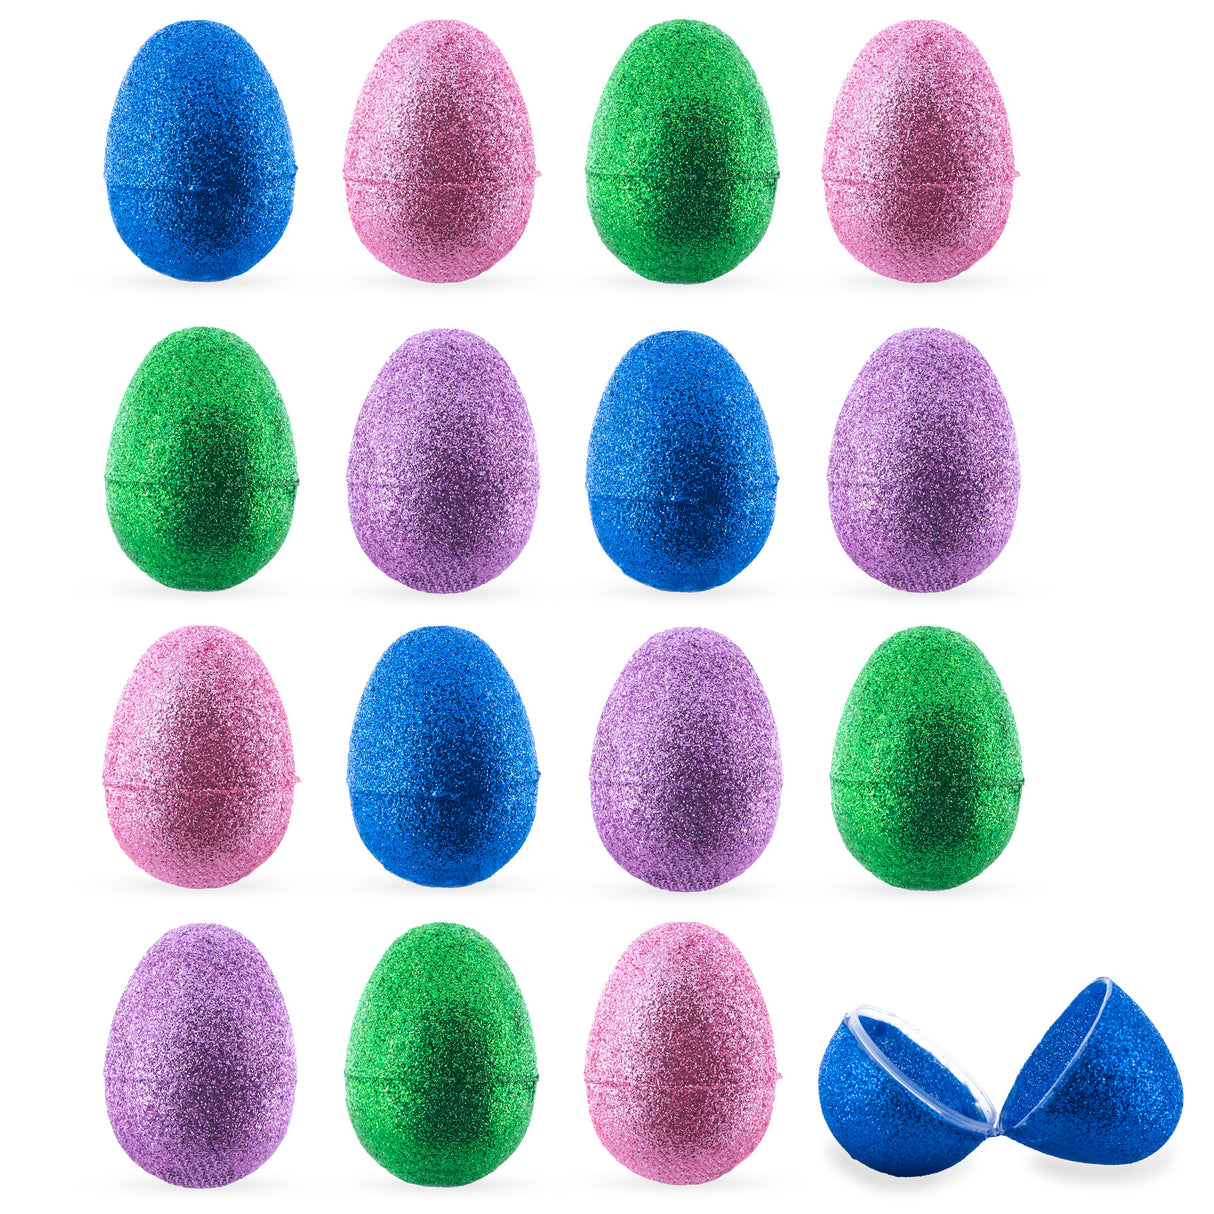 Plastic Radiant Easter Delight: Set of 16 Shiny Glittered Multicolored Plastic Easter Eggs, 2.3 Inches in Multi color Oval